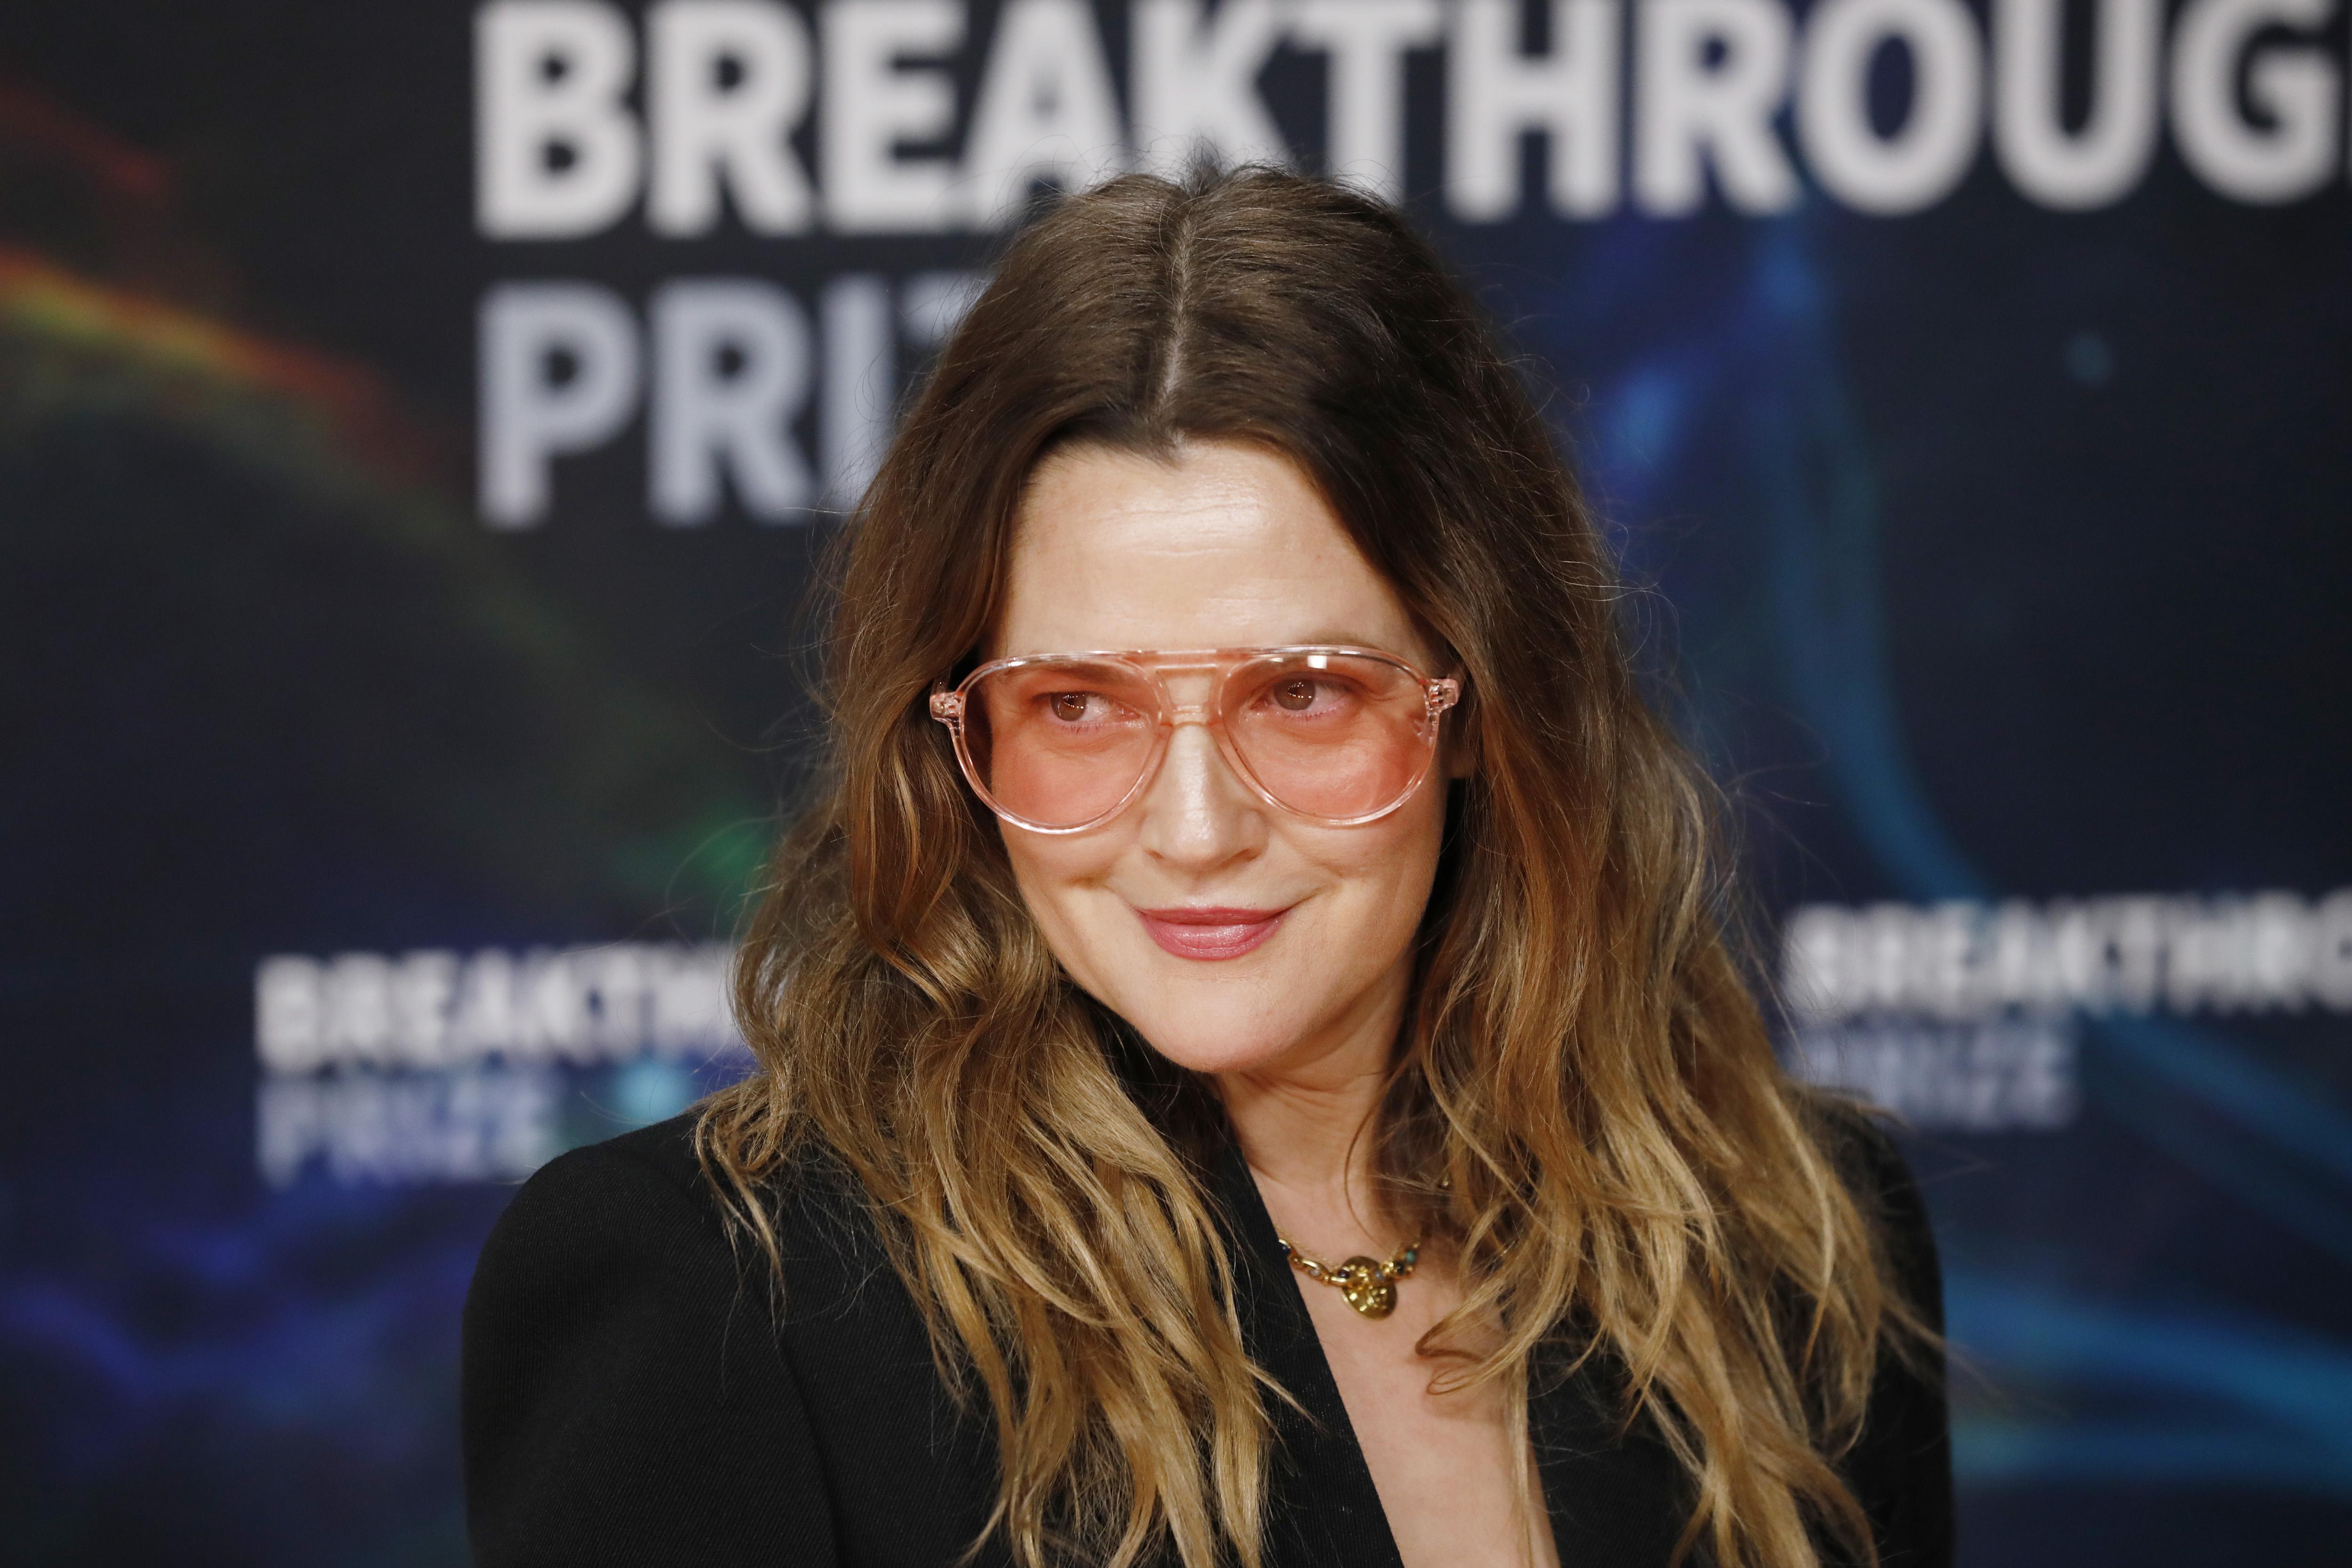 Drew Barrymore pictured in sunglasses at the 2020 Breakthrough Prize Ceremony at NASA Ames Research Center, 2019. California. | Photo: Getty Images.  